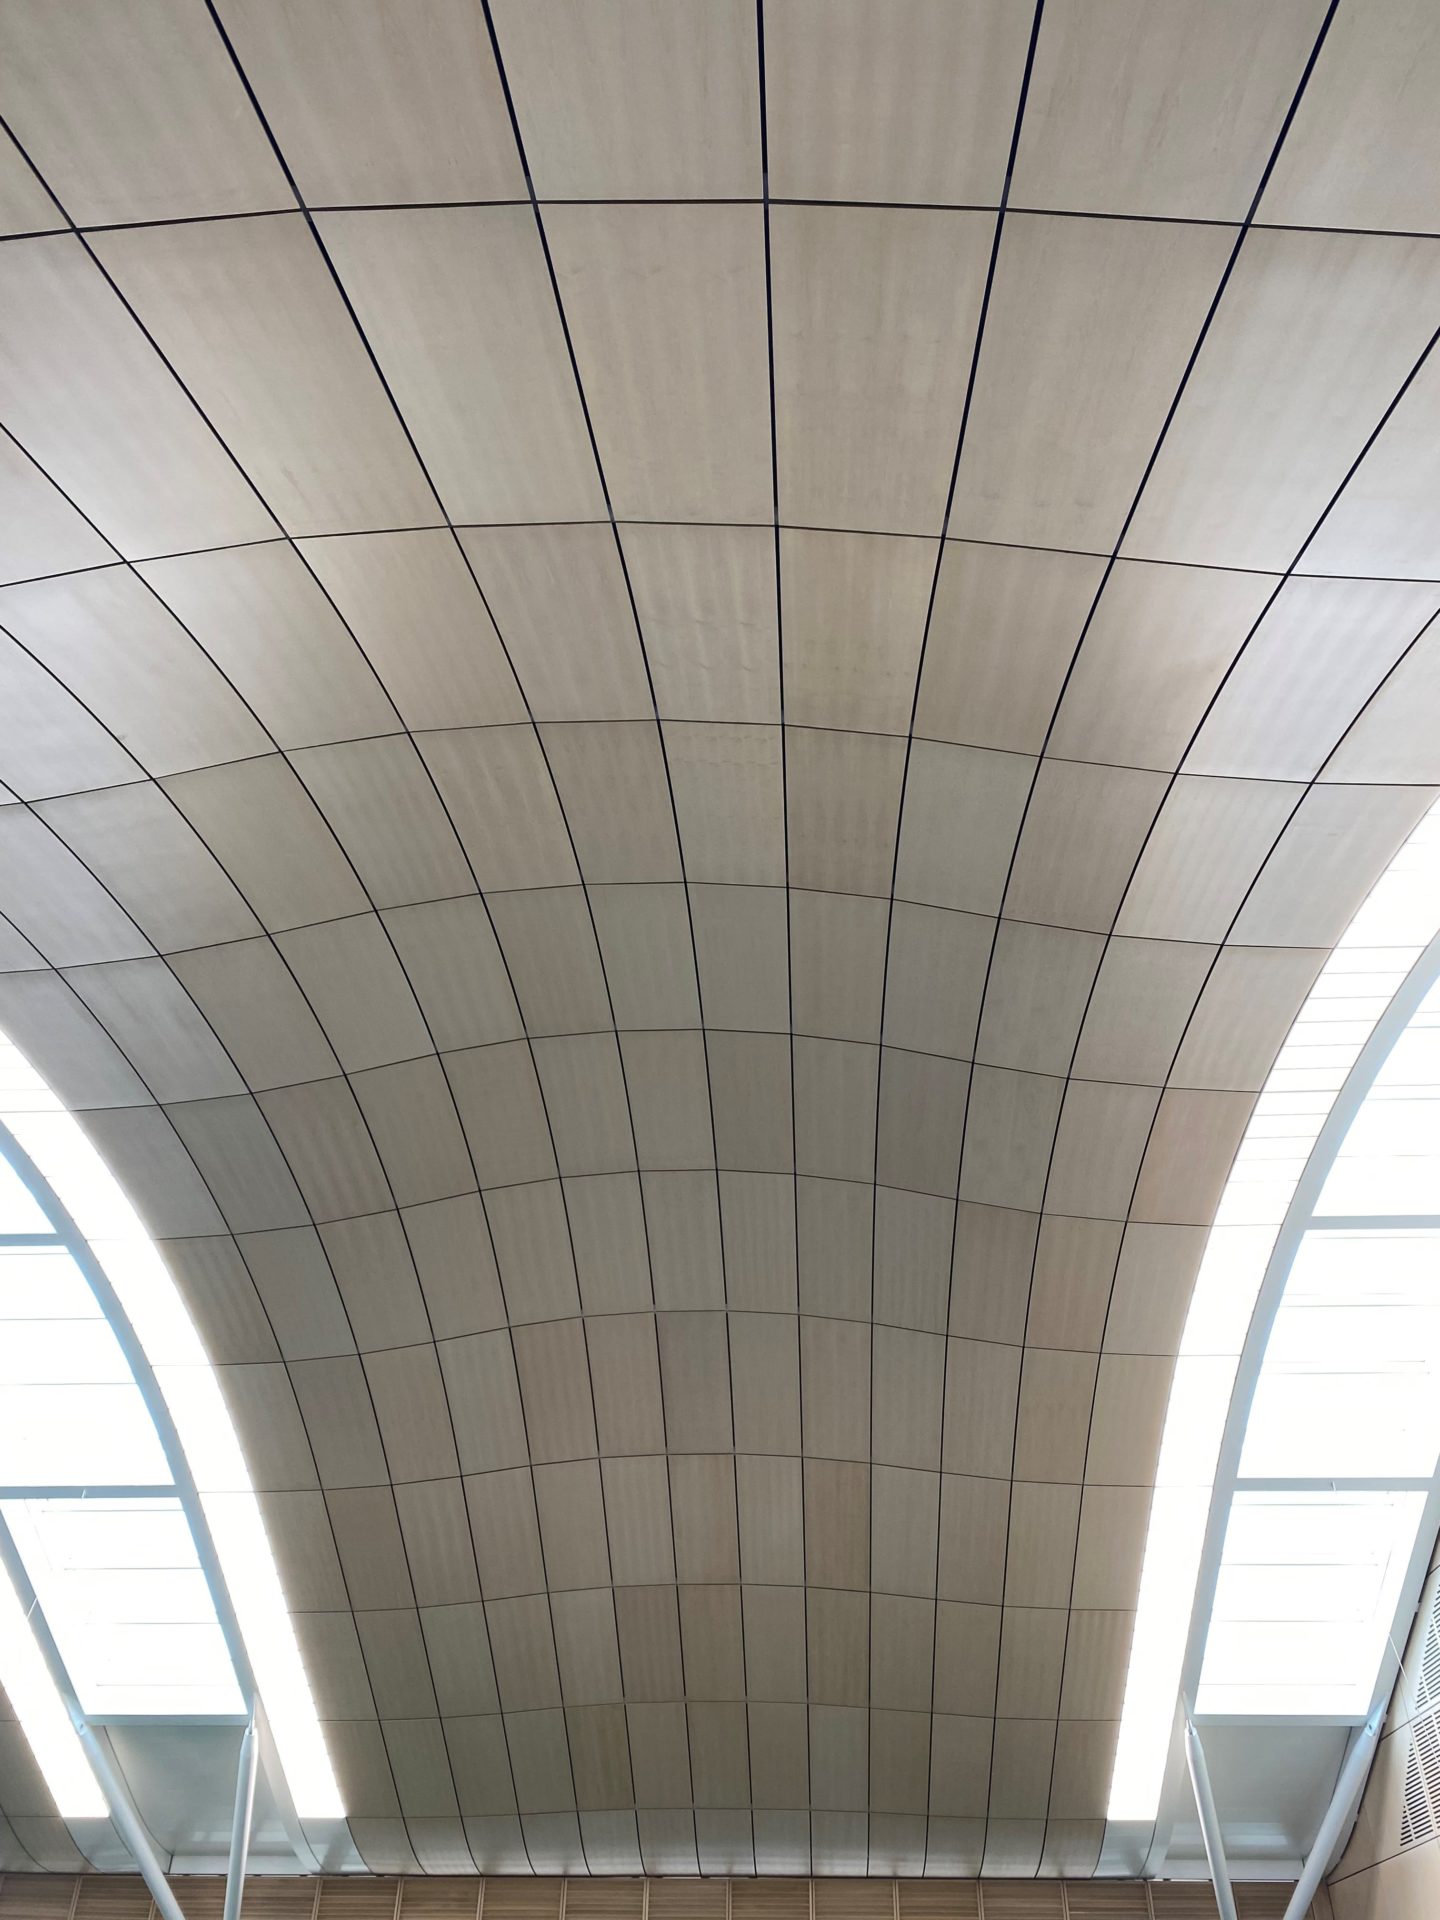 A curved ceiling with cladding.